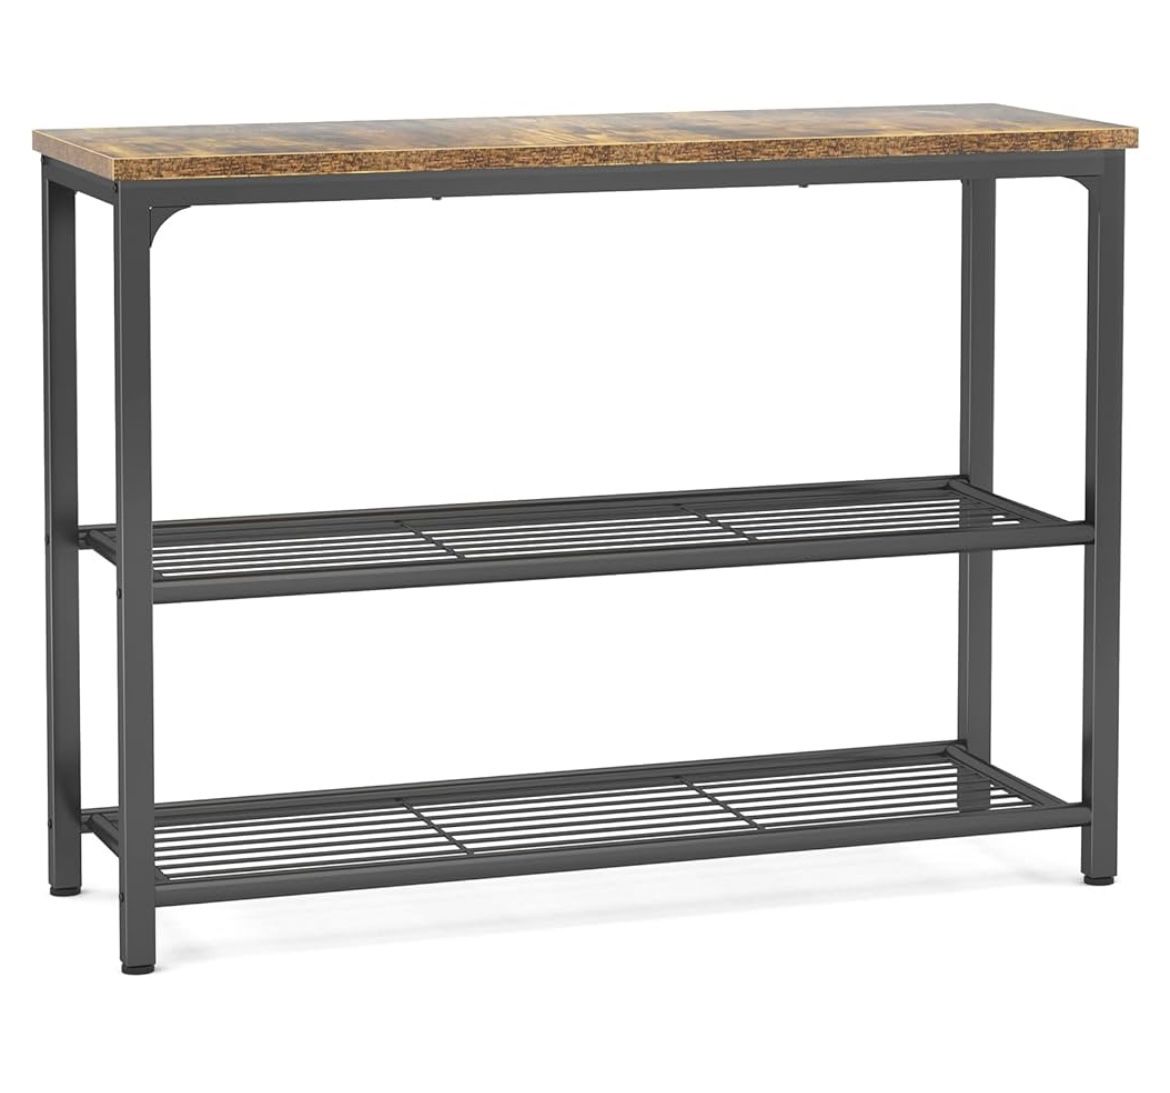 Console table with outlets